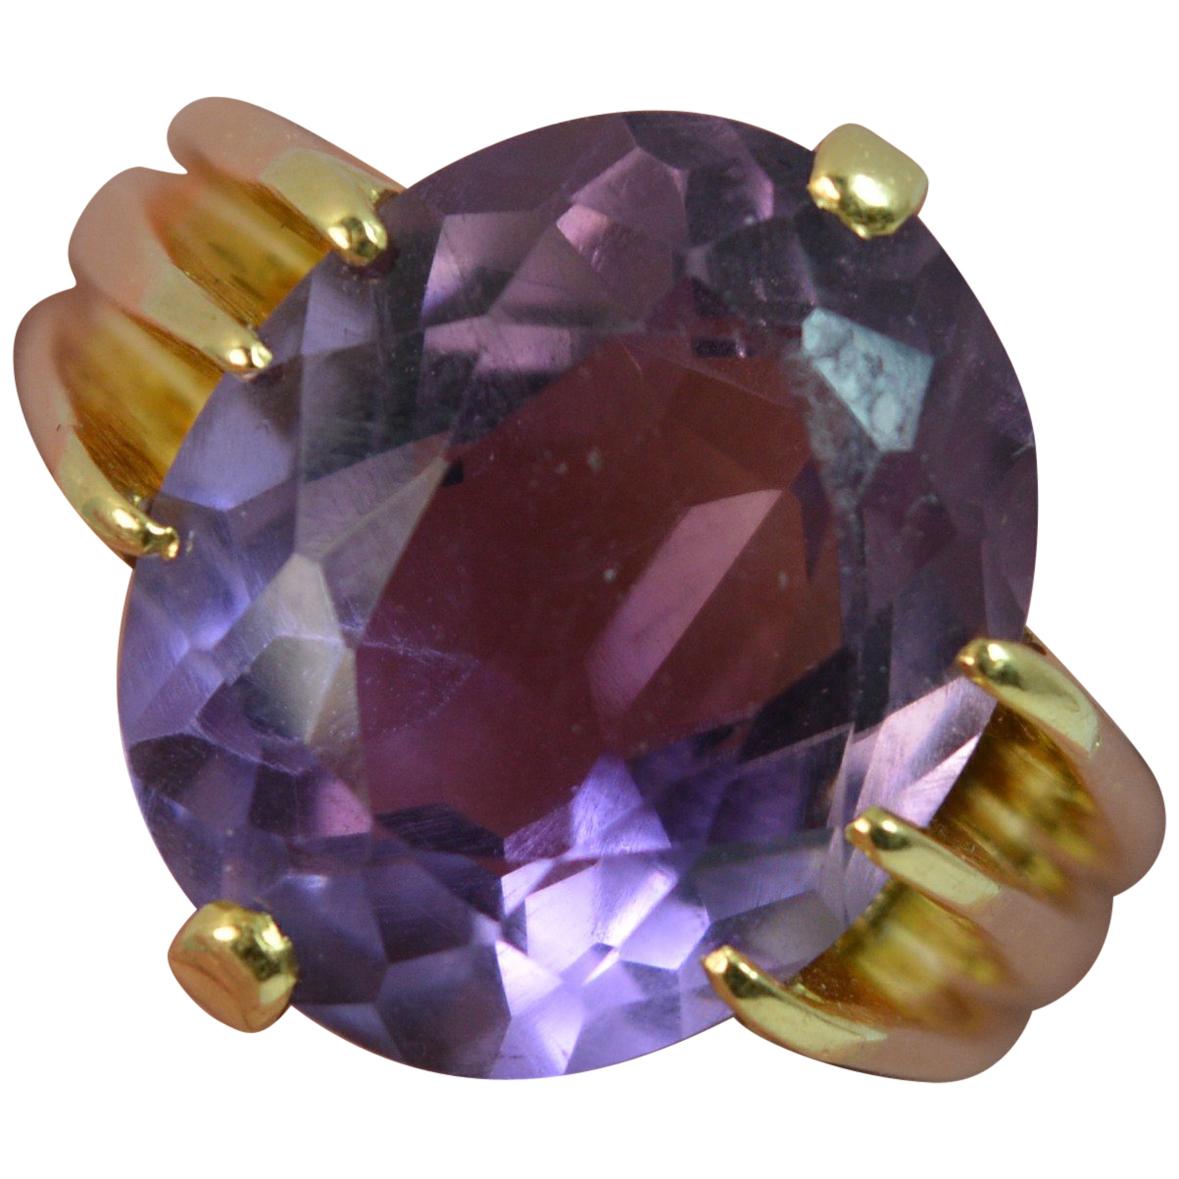 Heavy 1900 Victorian 18 Carat Gold and Large Amethyst Solitaire Ring